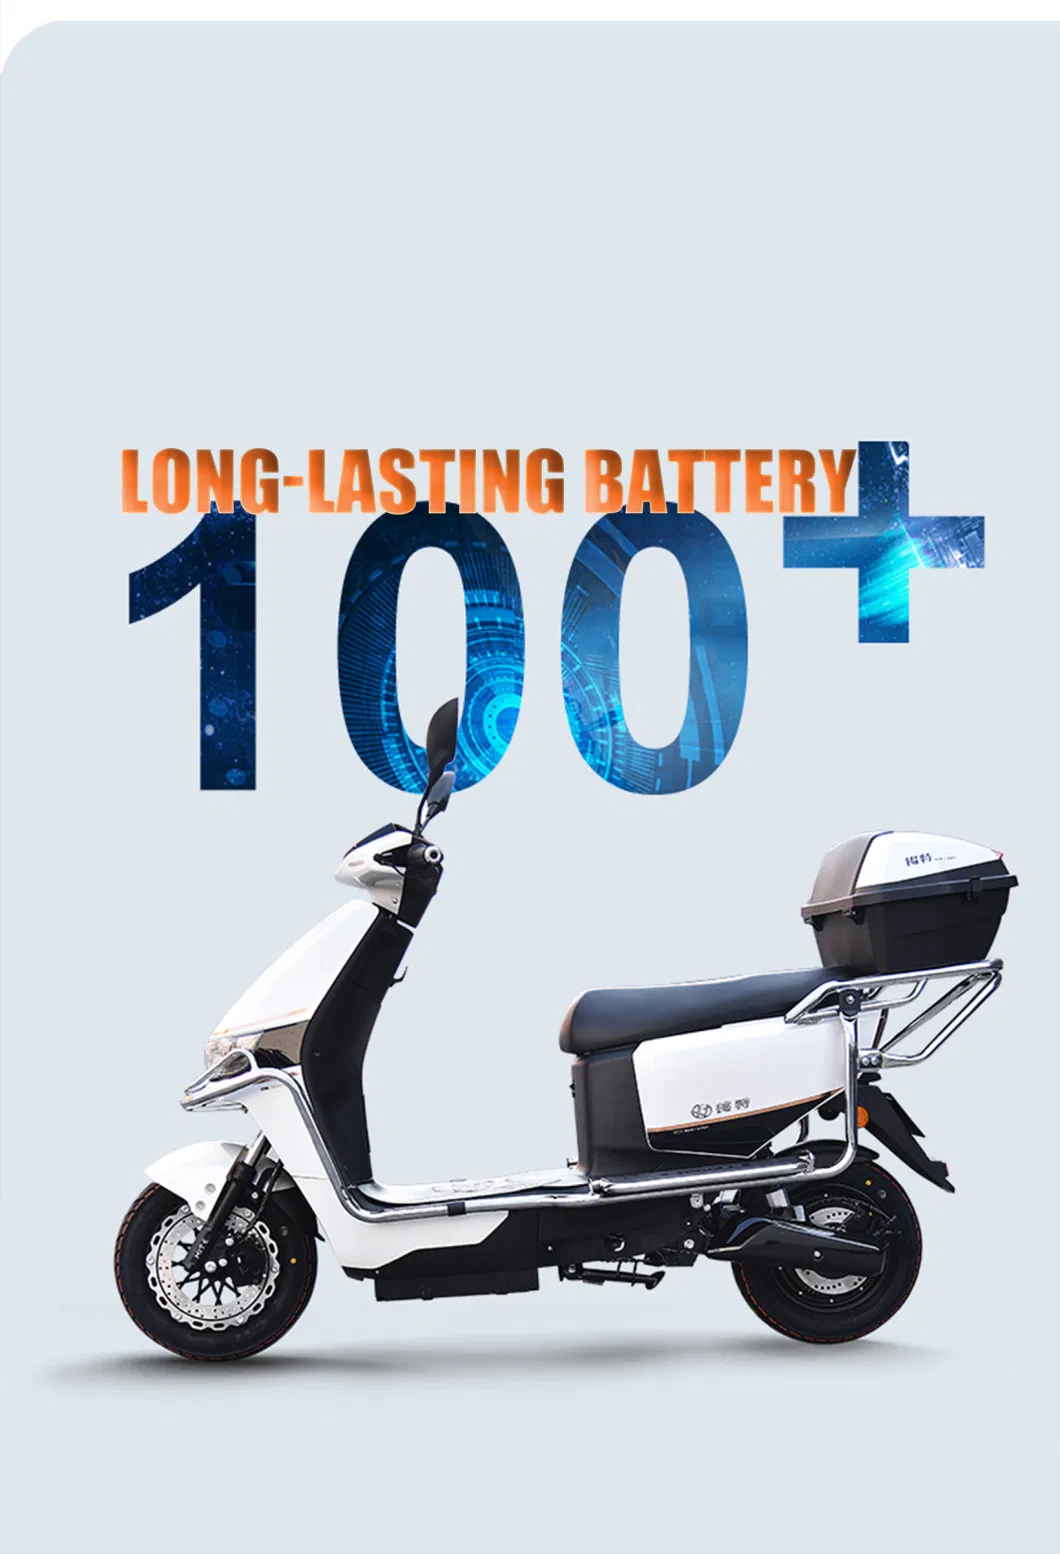 Factory Enclosed Tricycle Sale High Speed Mini for Bicycle Wheel 800W Brush-Less DC Motor Electric Bike of Low Price Electric Scooter